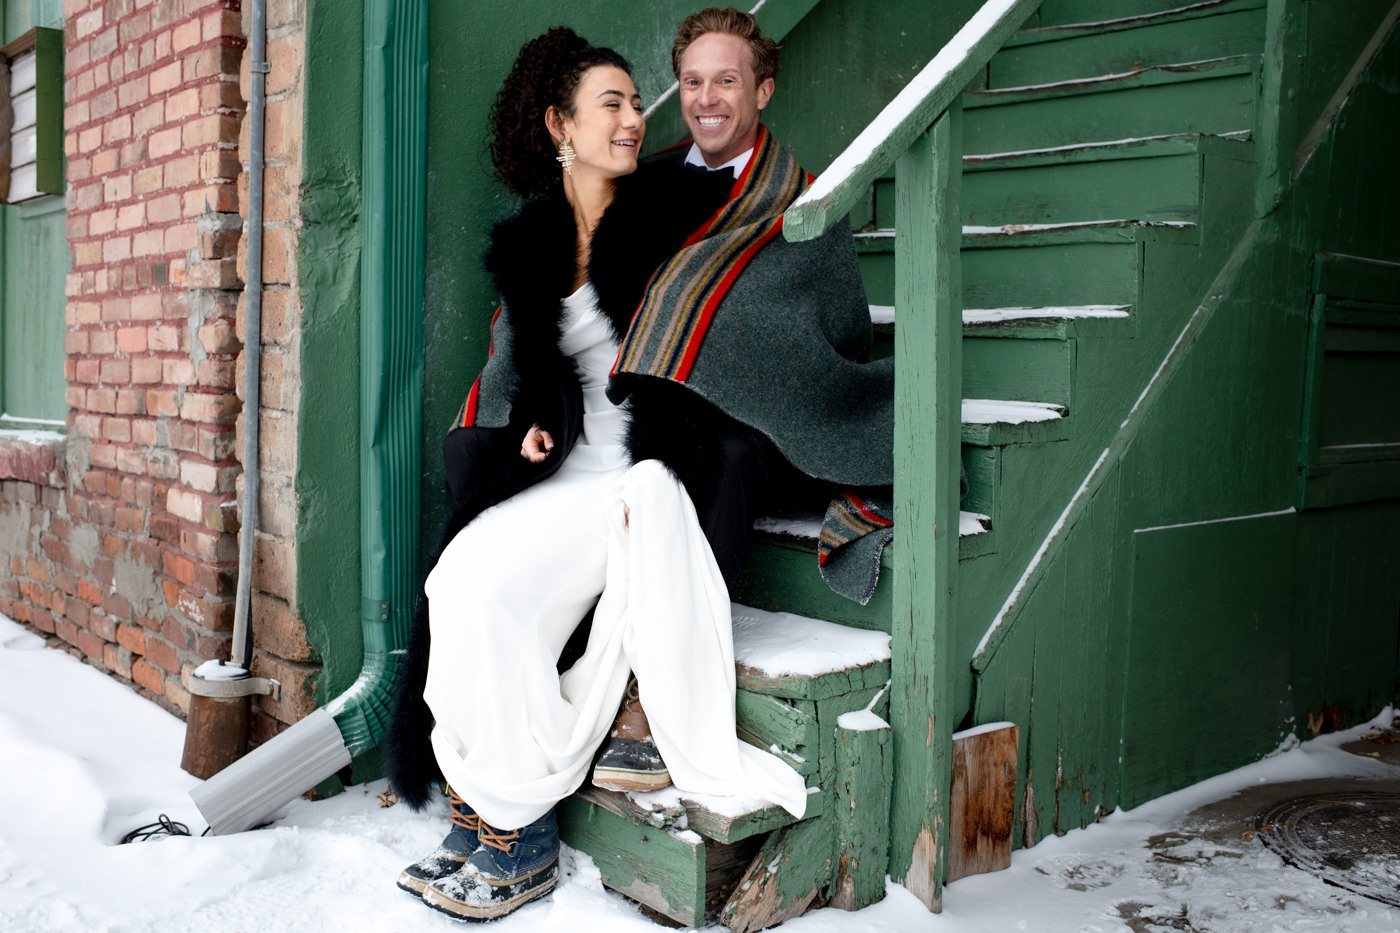 Wedding-Couple-laughing-portrait-on-green-stairs-Downtown-Bozeman